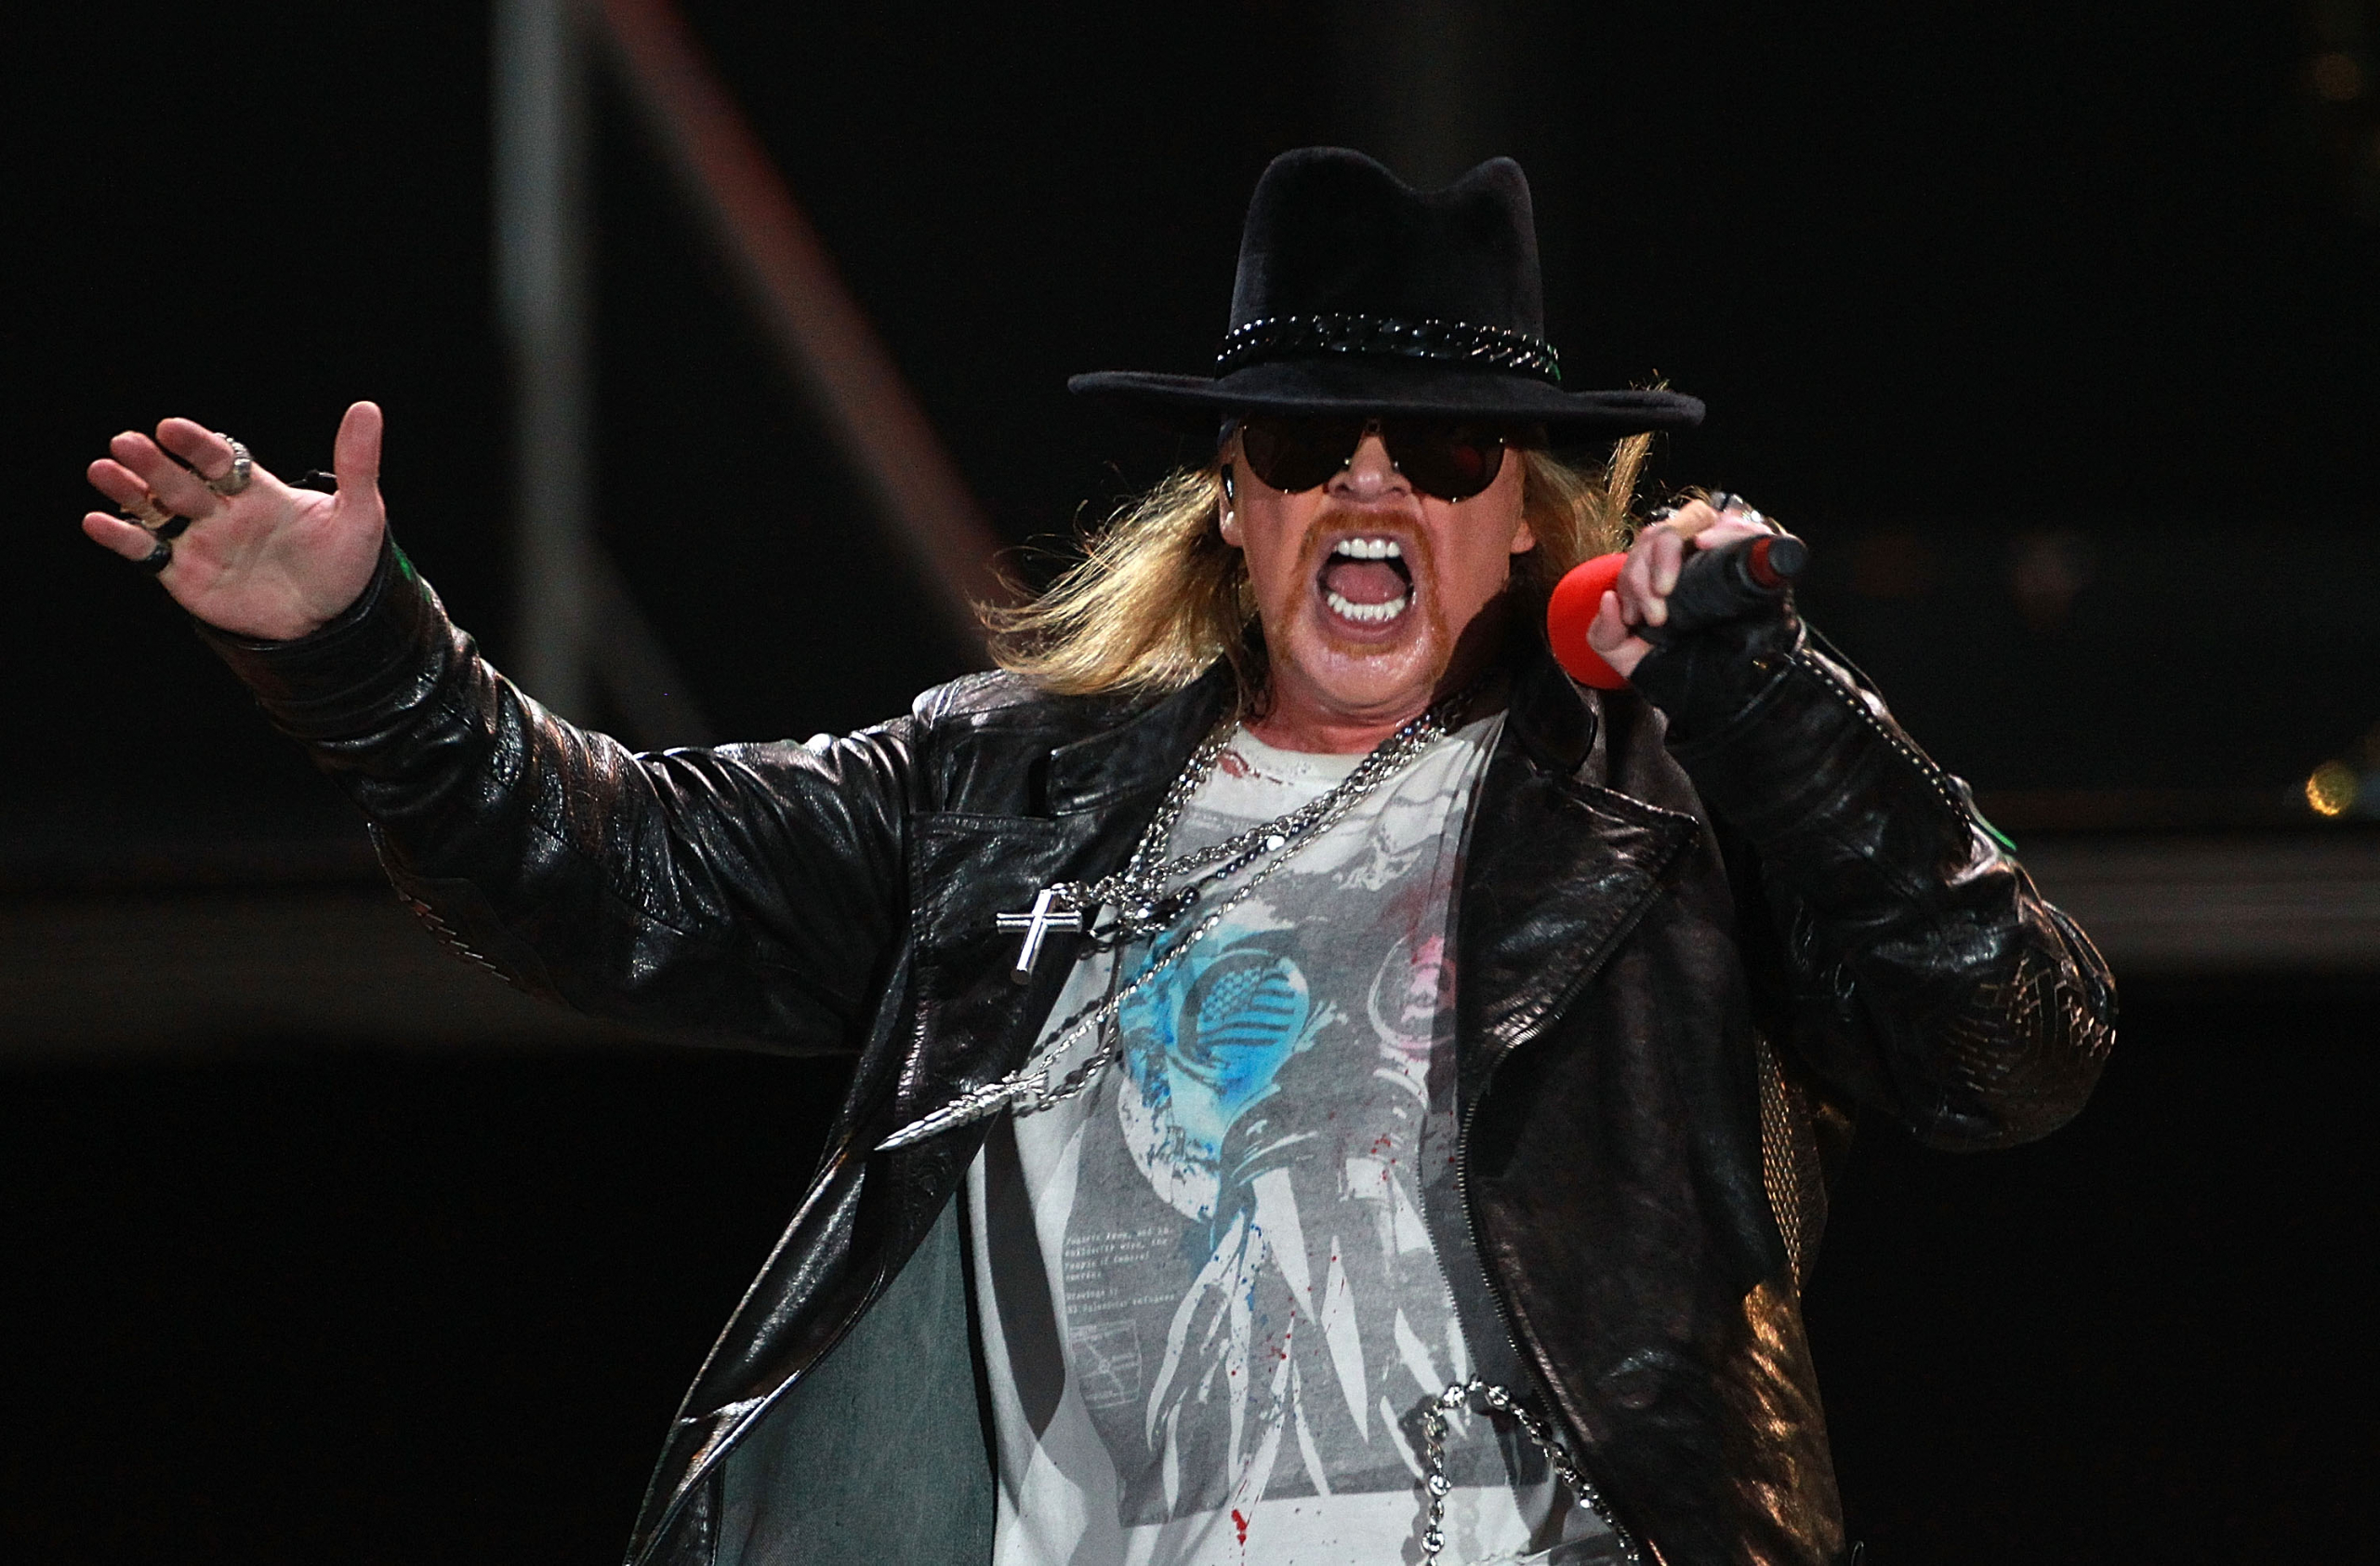 WATCH Guns N’ Roses new music video for “The General”